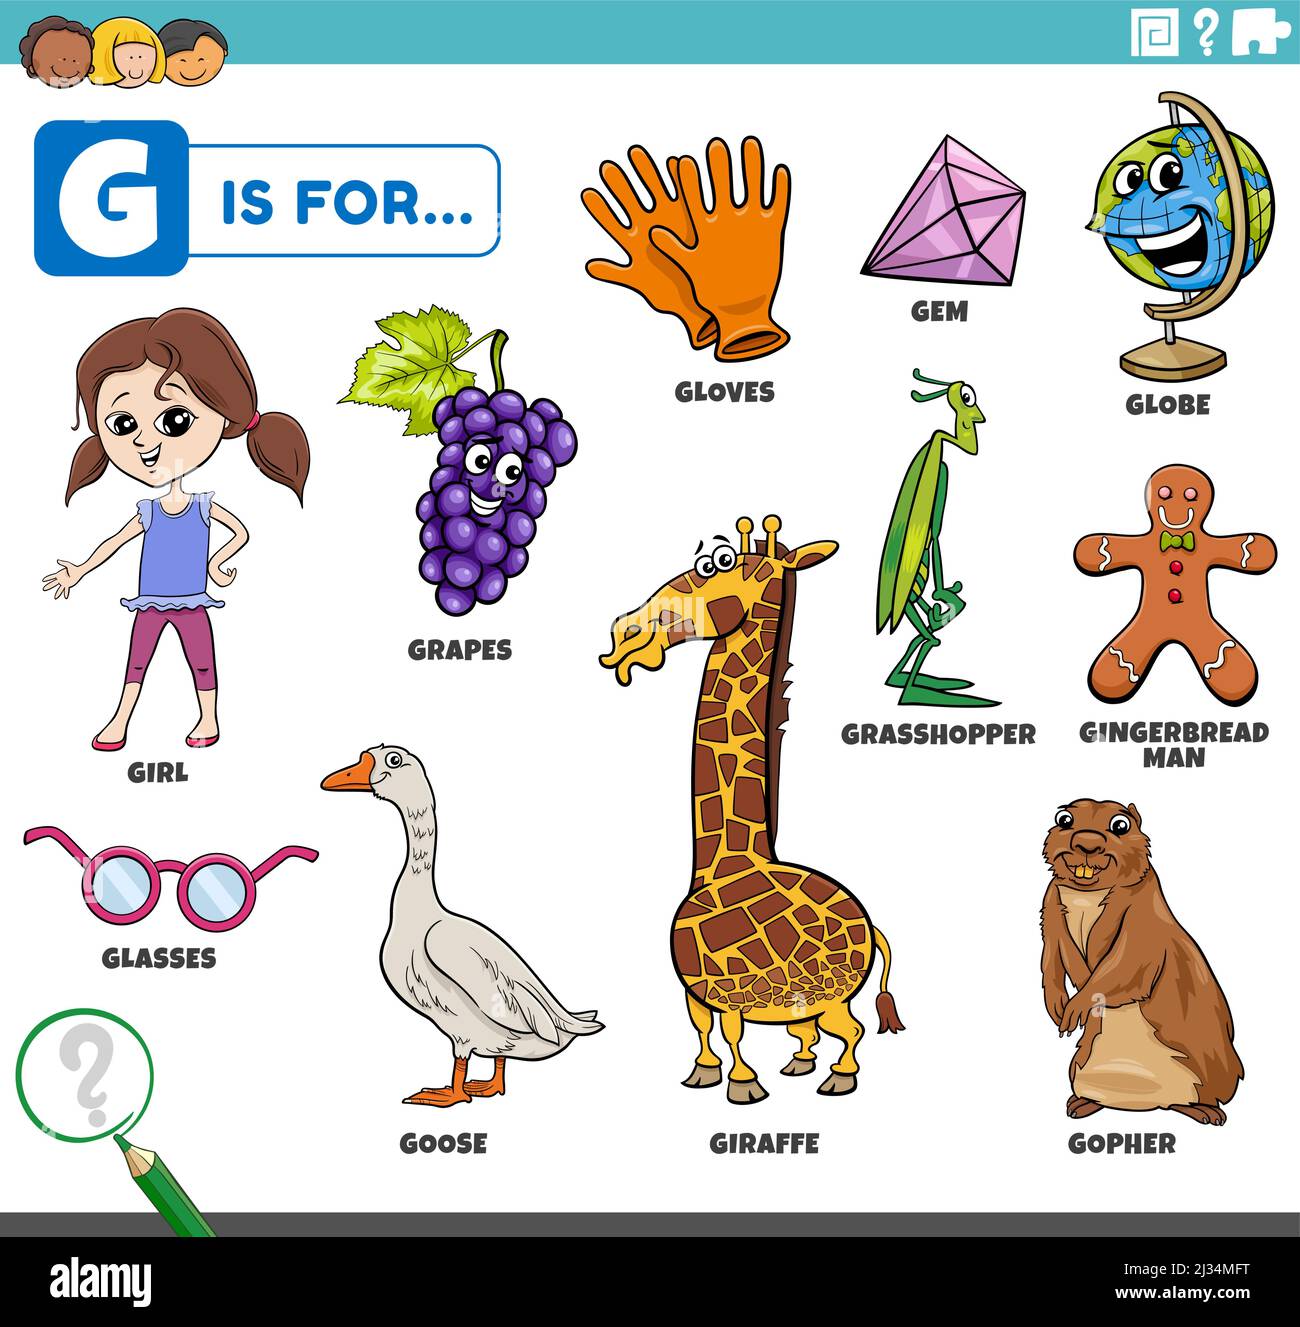 https://c8.alamy.com/comp/2J34MFT/educational-cartoon-illustration-for-children-with-comic-characters-and-objects-set-for-letter-g-2J34MFT.jpg